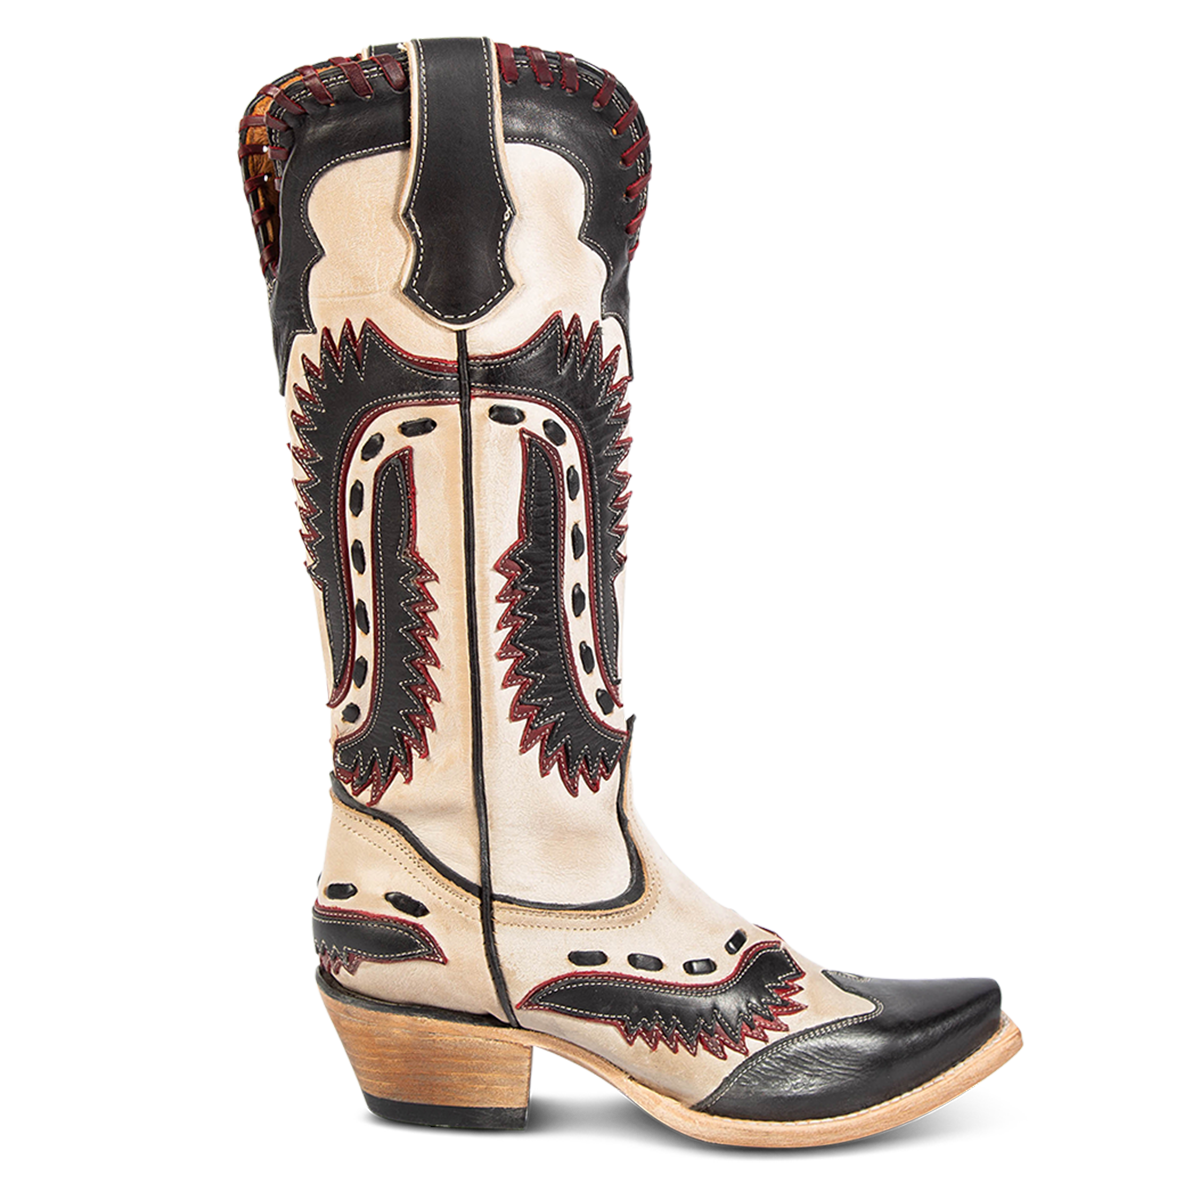 FREEBIRD women's Wayne taupe multi leather western mid-calf boot with whip-stitch and laser cut detailing, a snip toe and inside working brass zipper